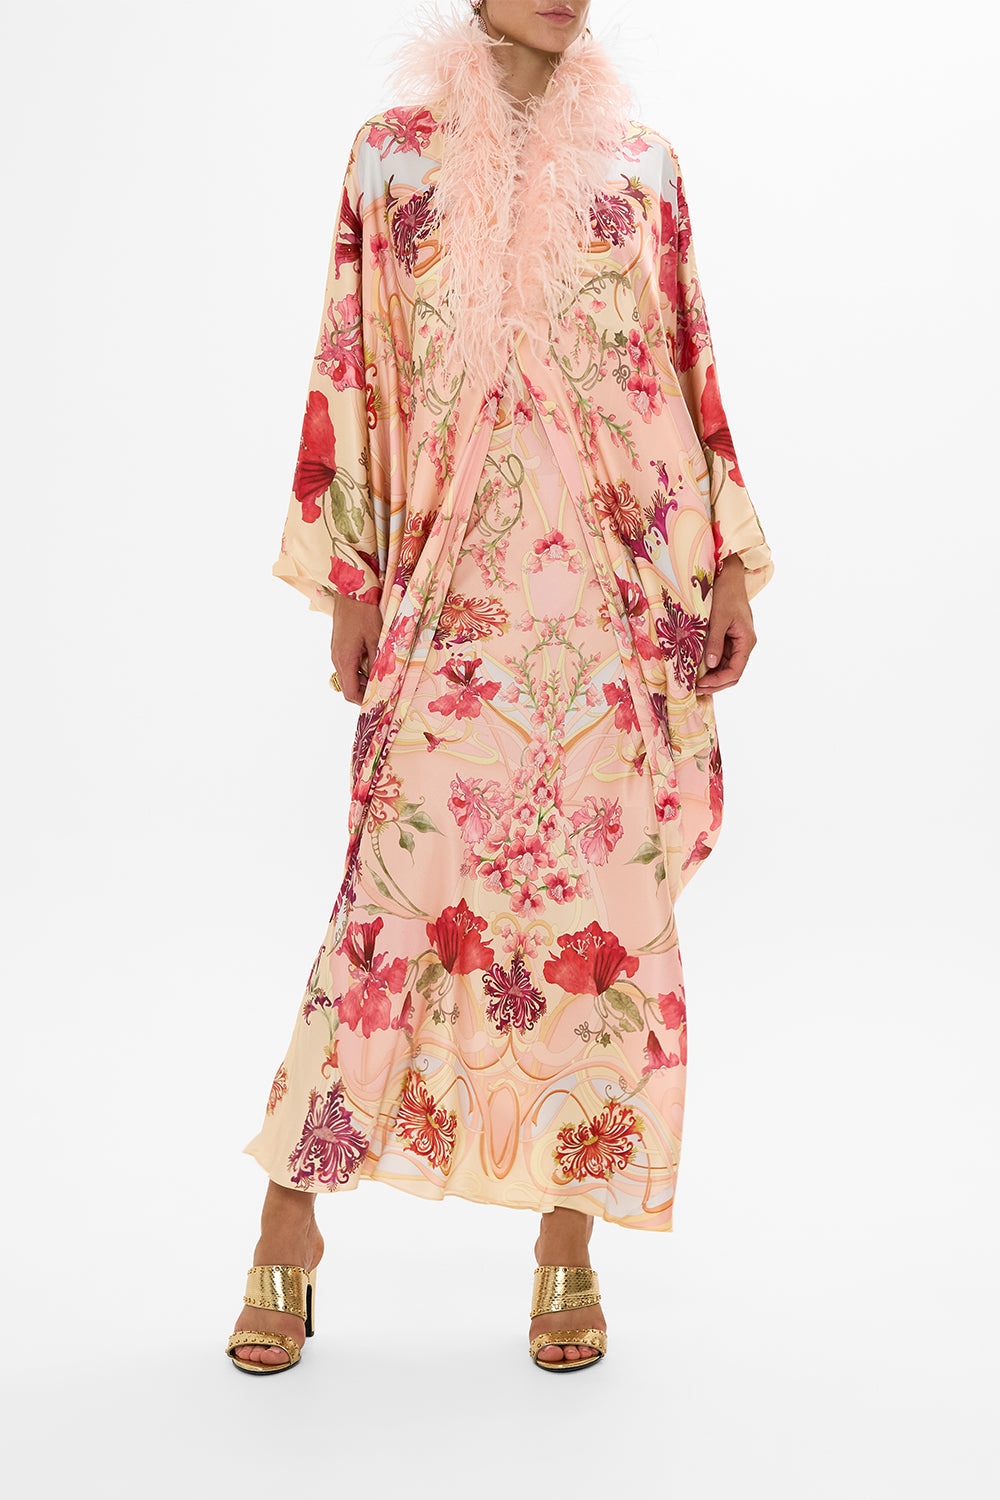 CAMILLA Floral Draped Back Layer with Feather Collar in Blossoms and Brushstrokes